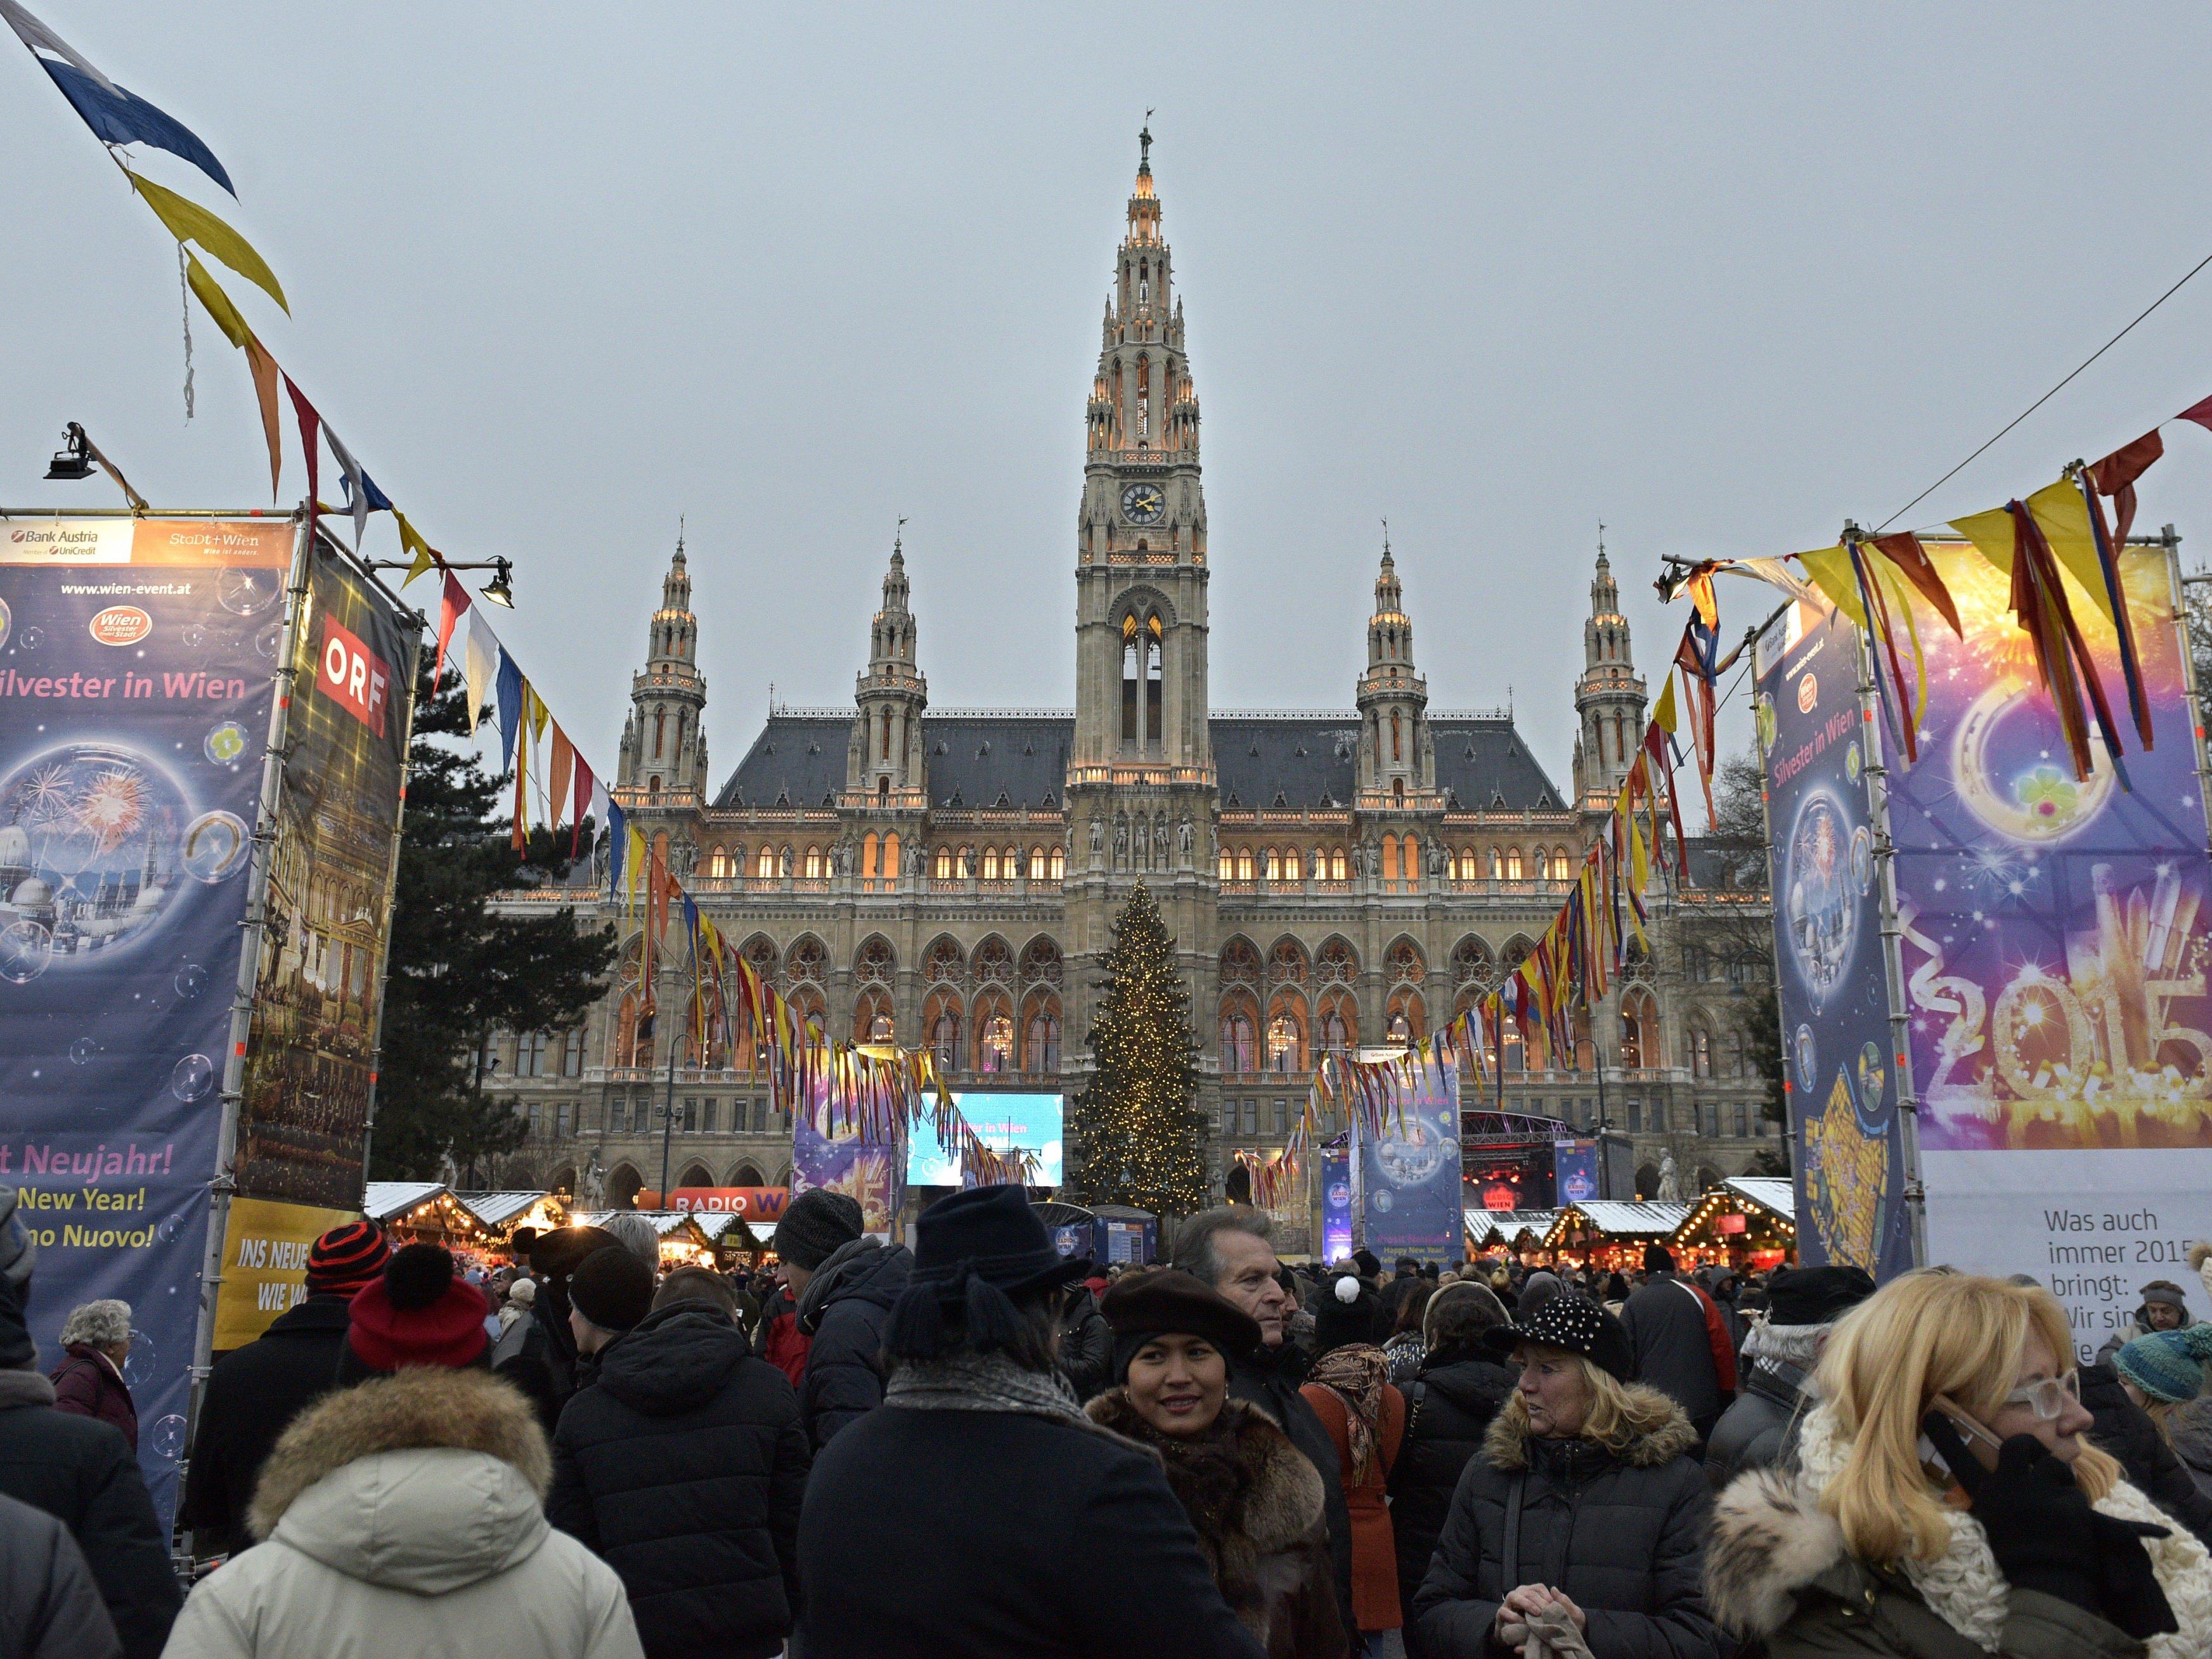 The New Year Celebrations in Vienna on 31 December 2016